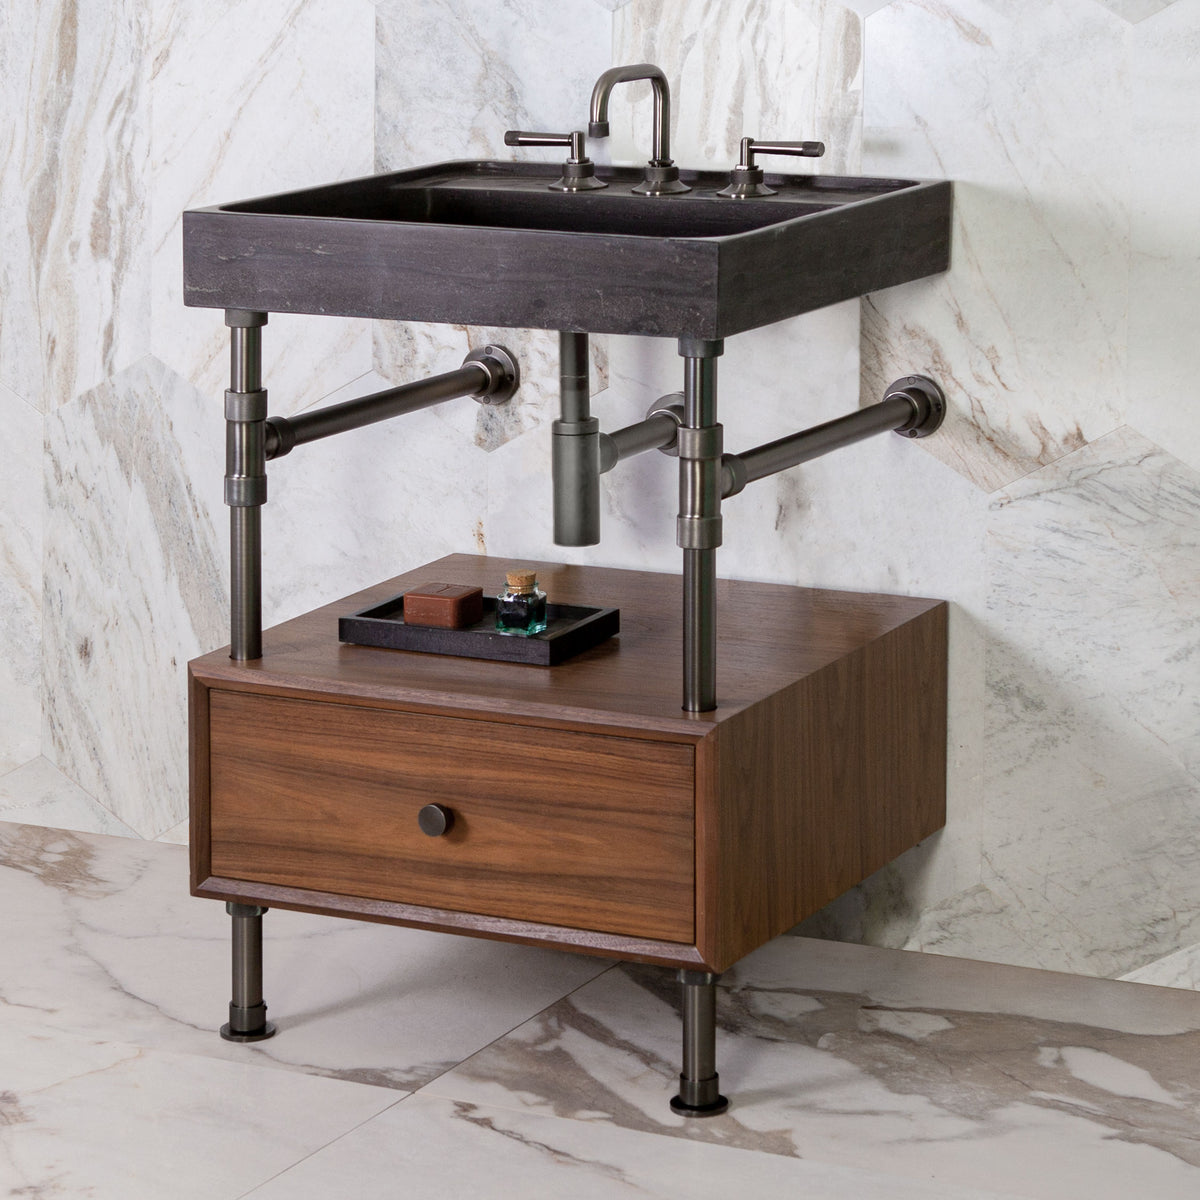 Ventus Bath Sink with Faucet Deck in antique gray limestonepaired with Elemental Classic Drawer Vanity in graphite with walnut drawer image 1 of 3